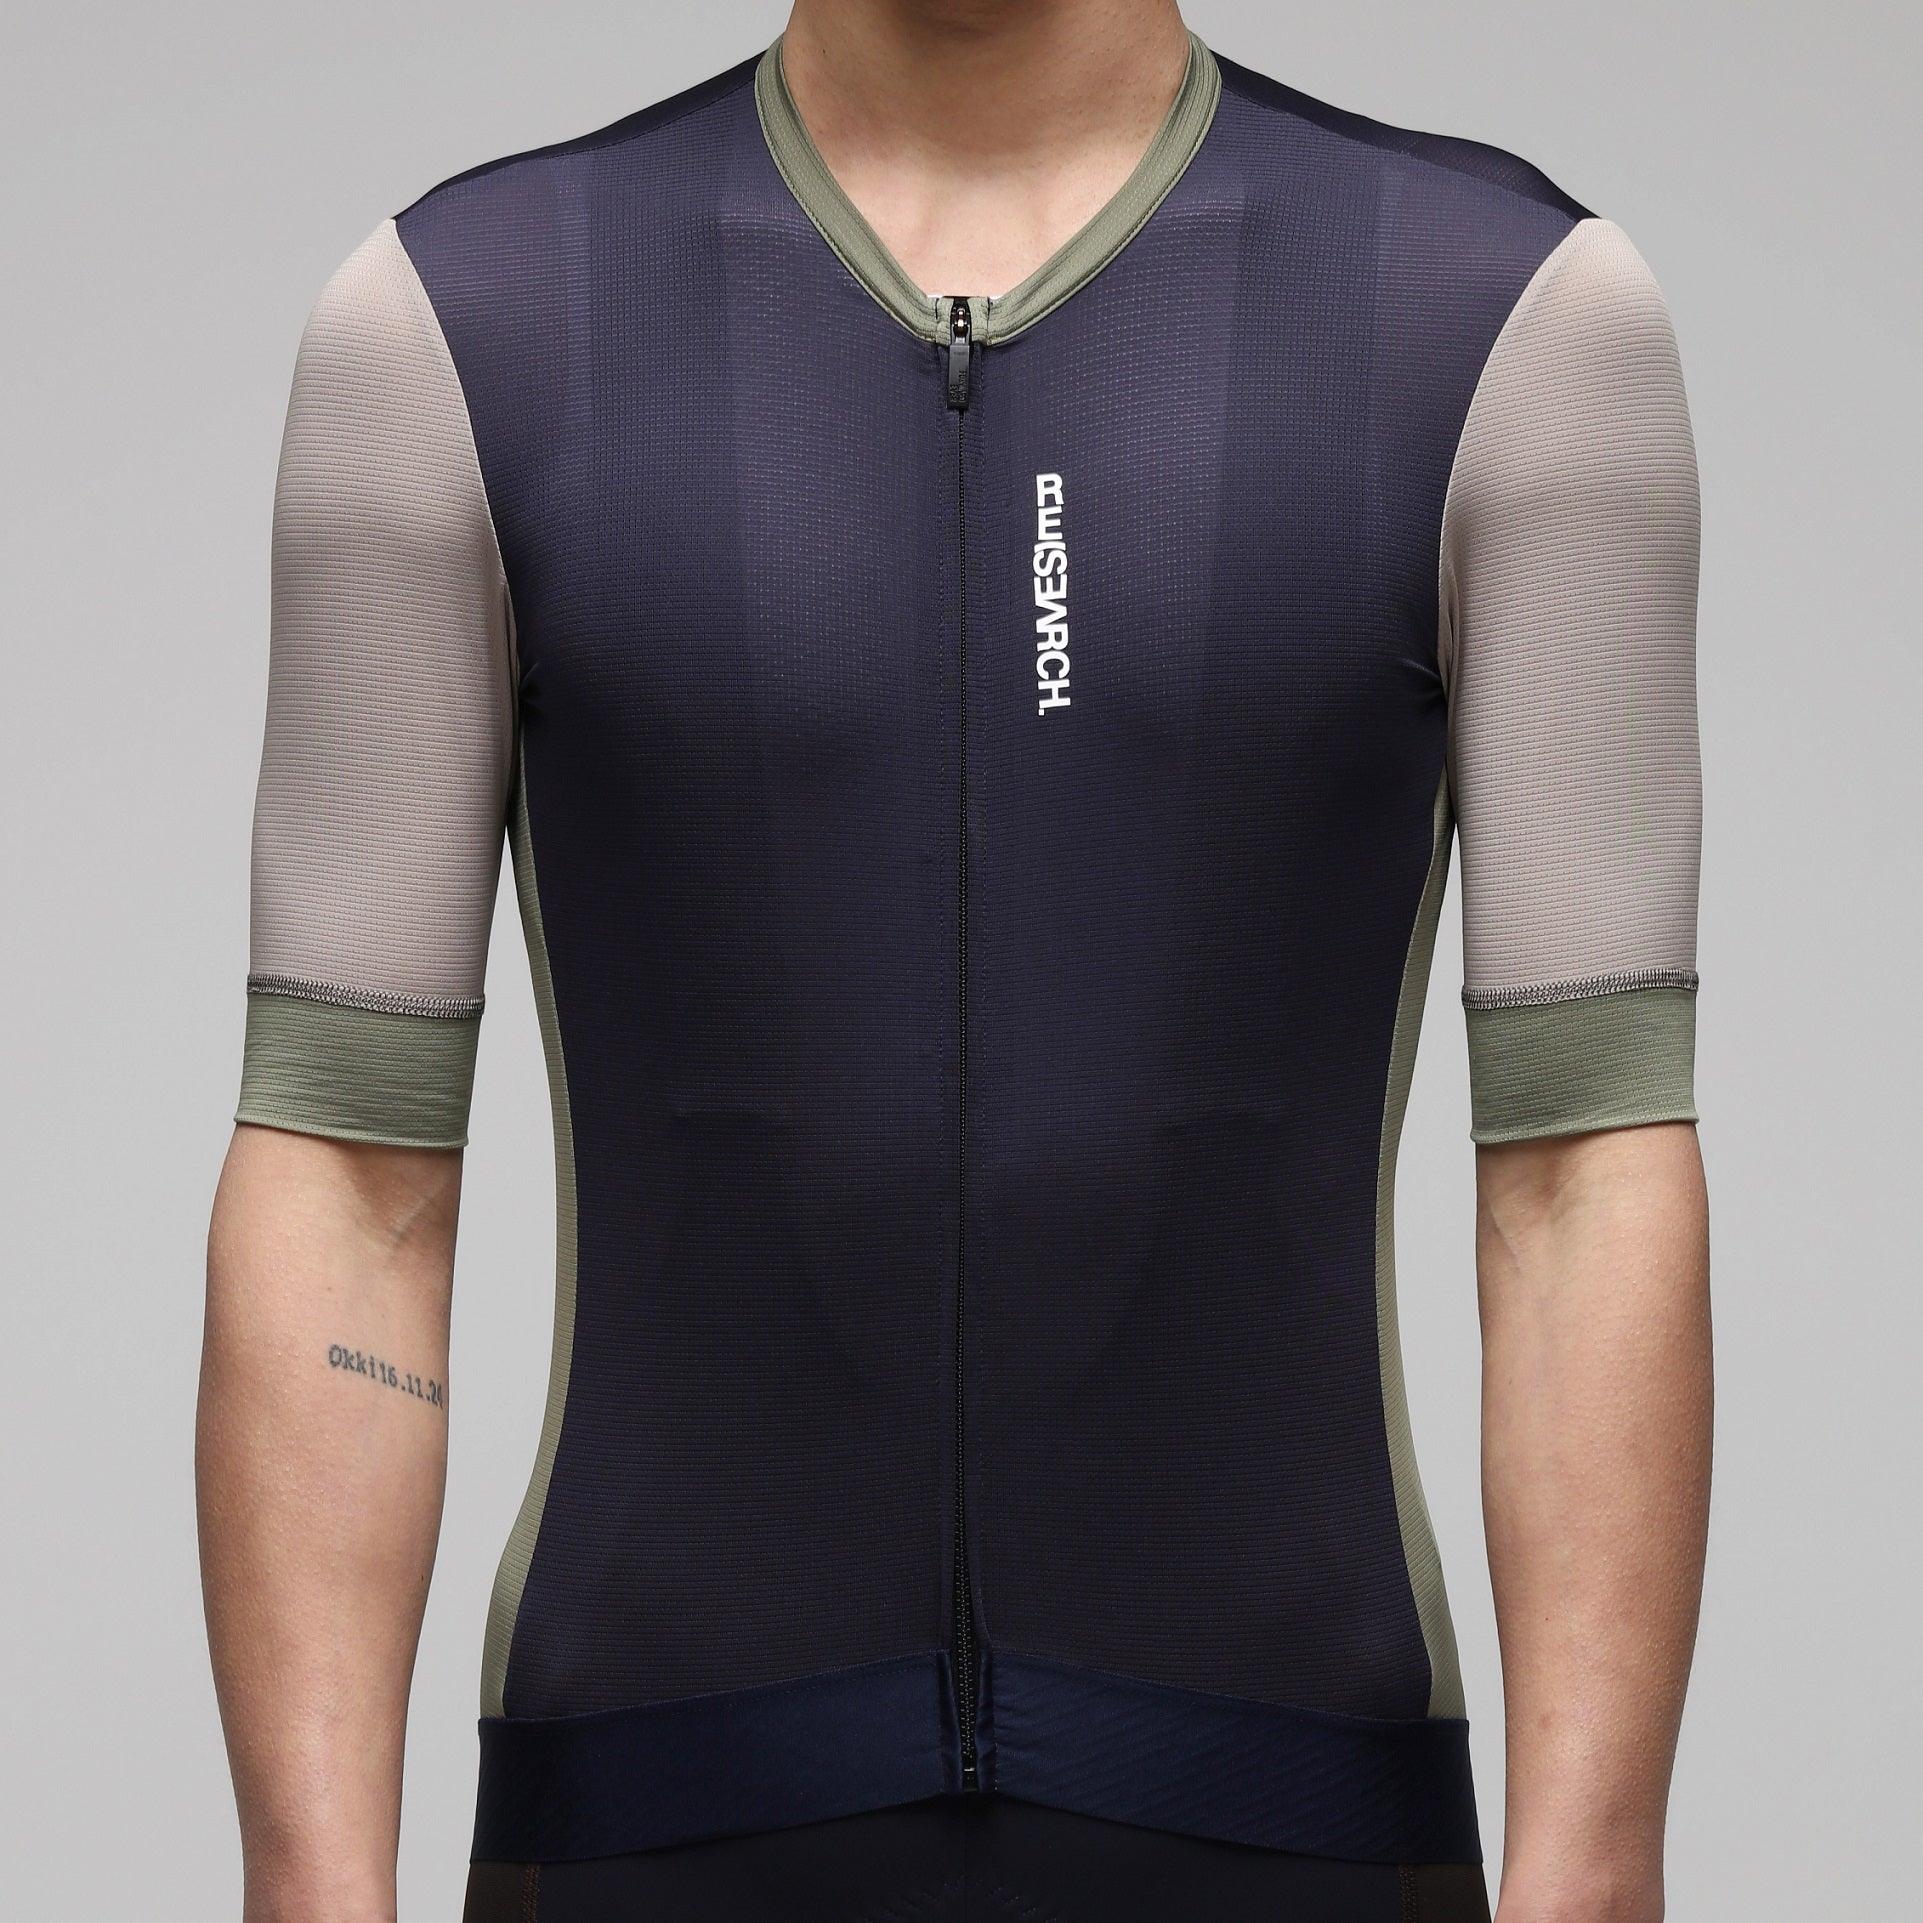 Research Jersey - Prussian Blue - GRC Cycling Apparel